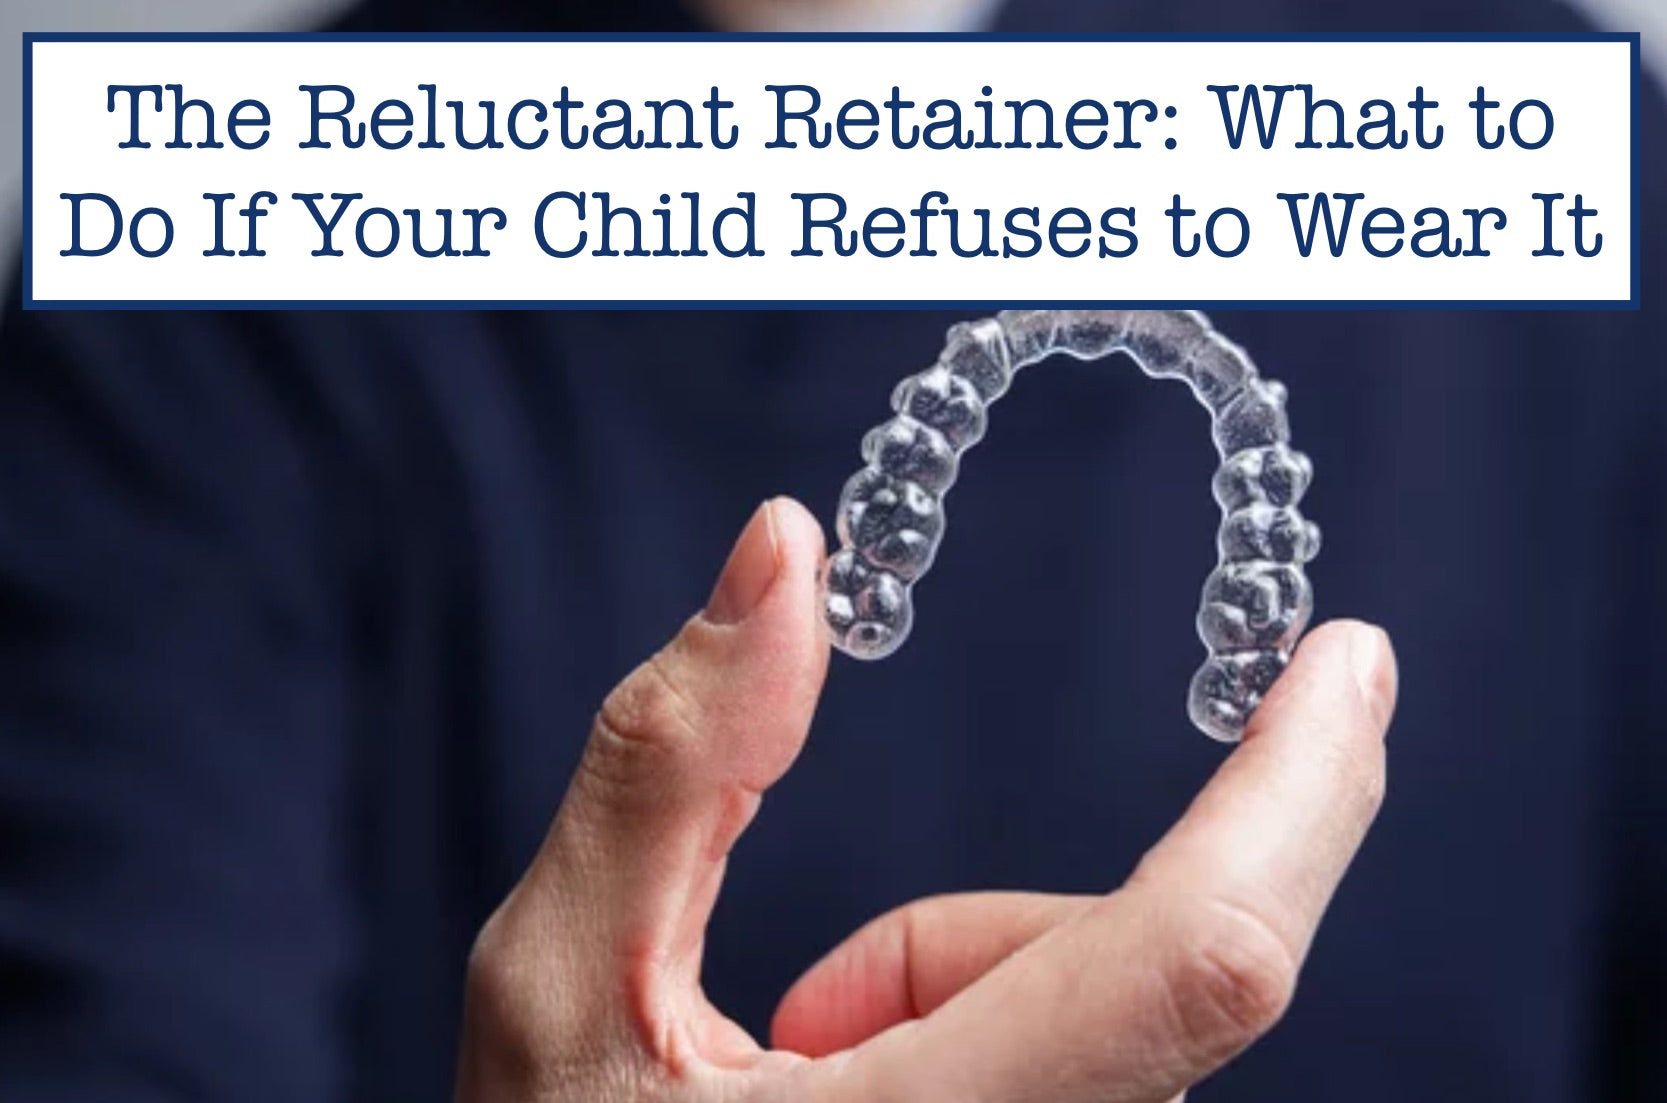 The Reluctant Retainer: What to Do If Your Child Refuses to Wear It